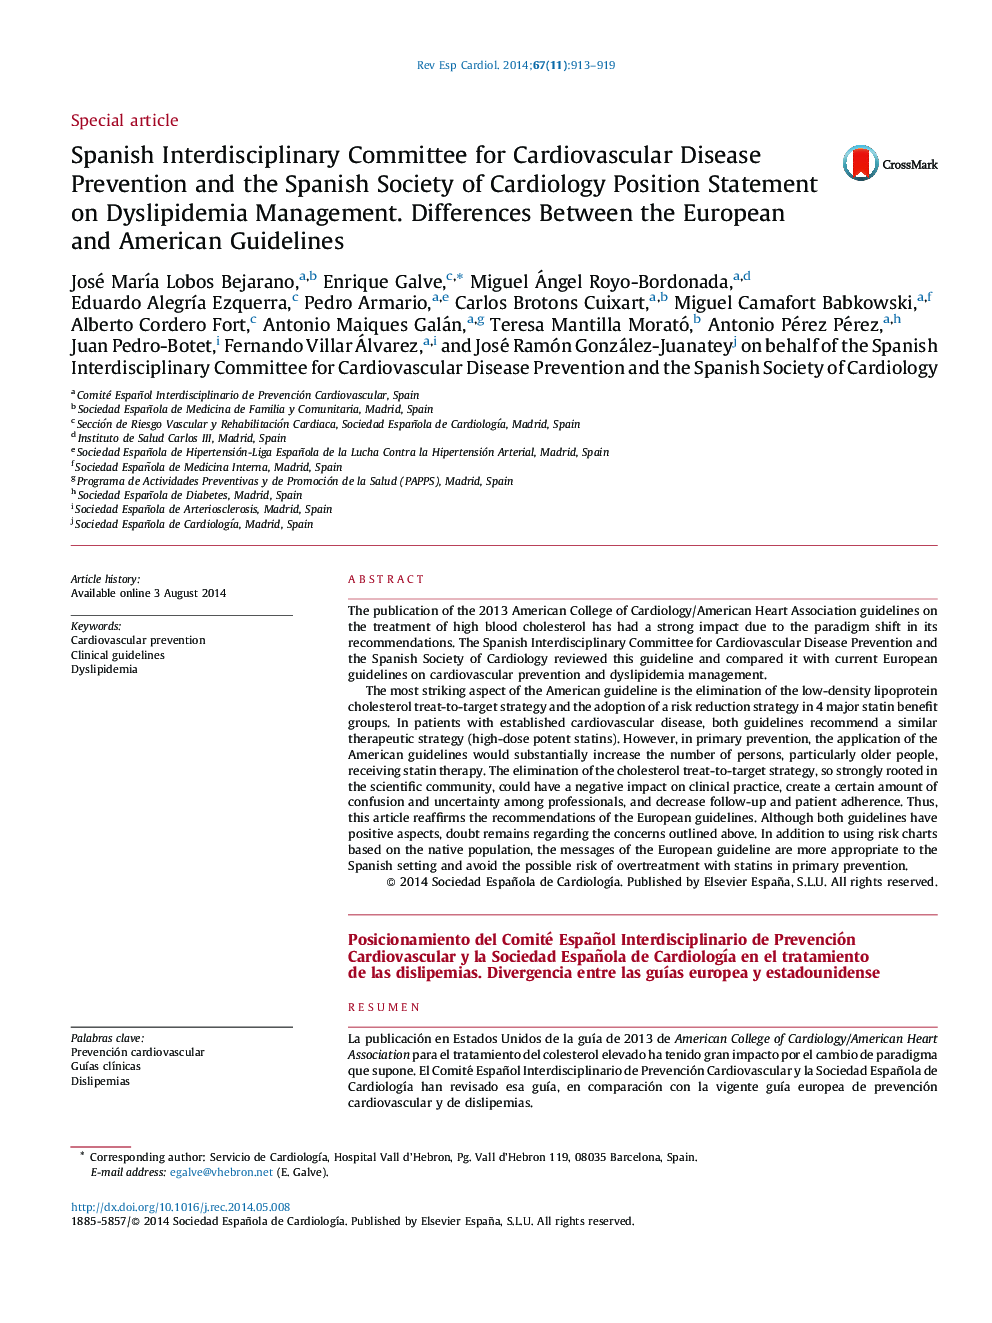 Spanish Interdisciplinary Committee for Cardiovascular Disease Prevention and the Spanish Society of Cardiology Position Statement on Dyslipidemia Management. Differences Between the European and American Guidelines